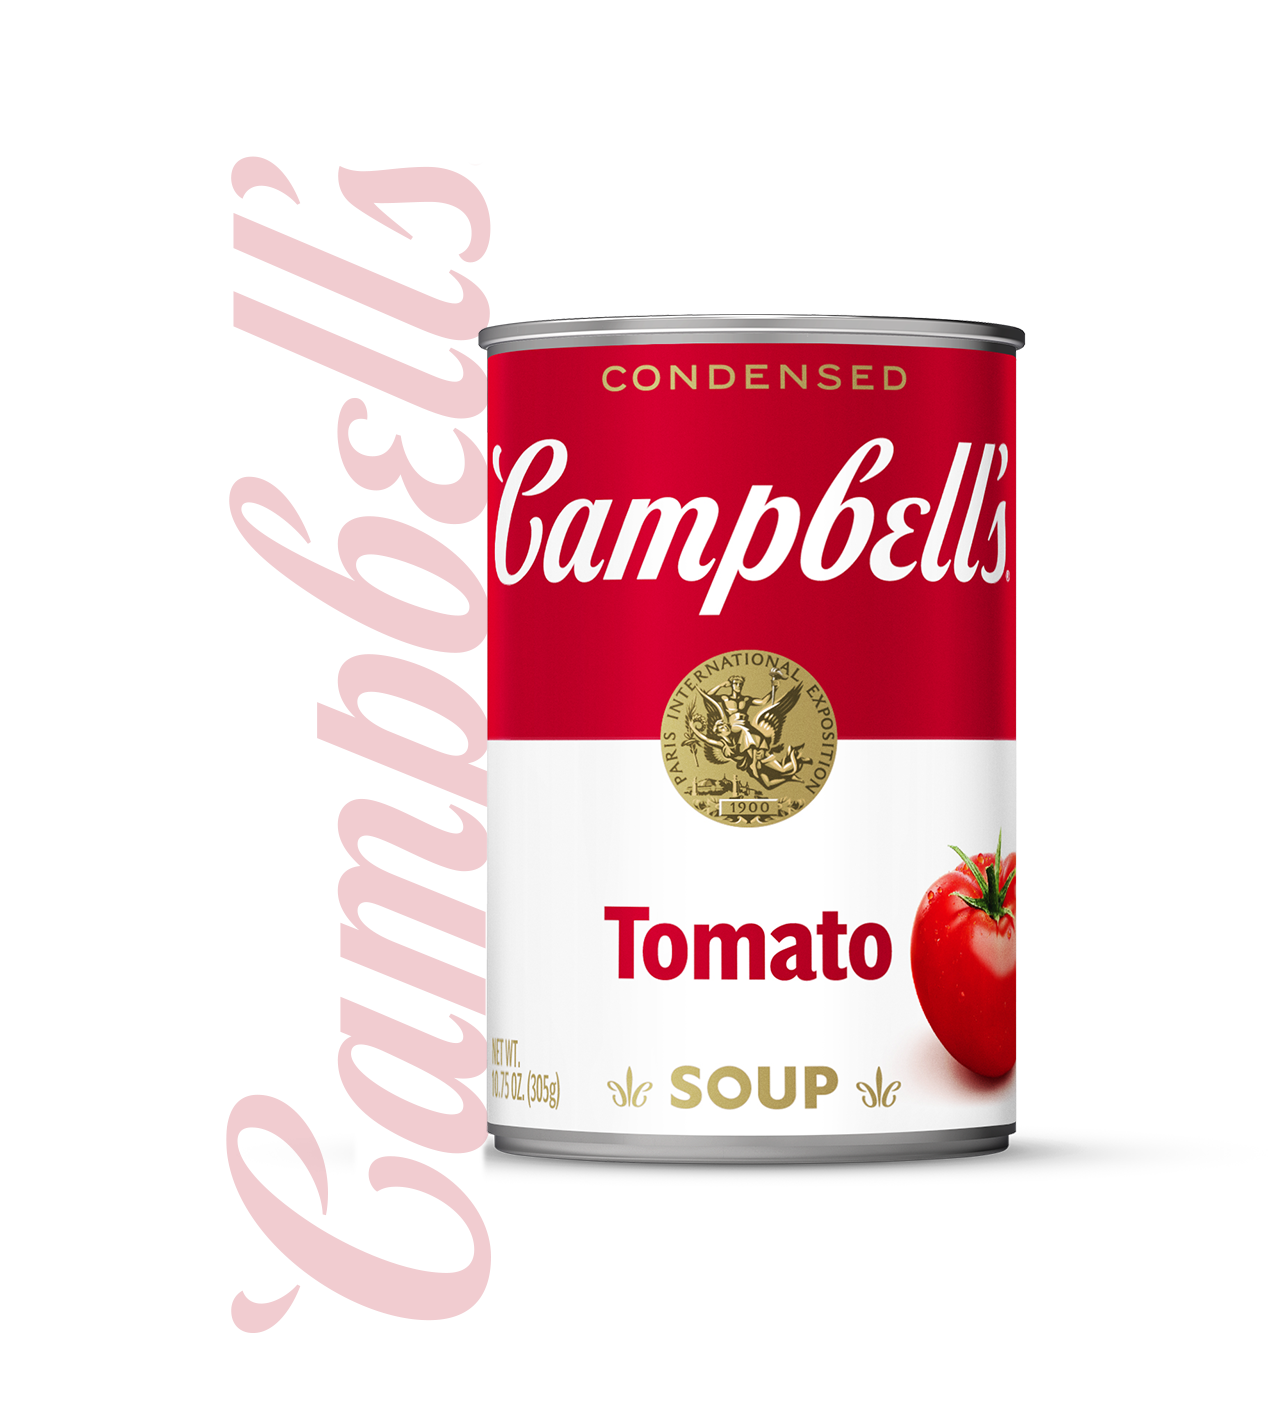 Quality Soups, Sauces, Food & Recipes - Campbell Soup Company